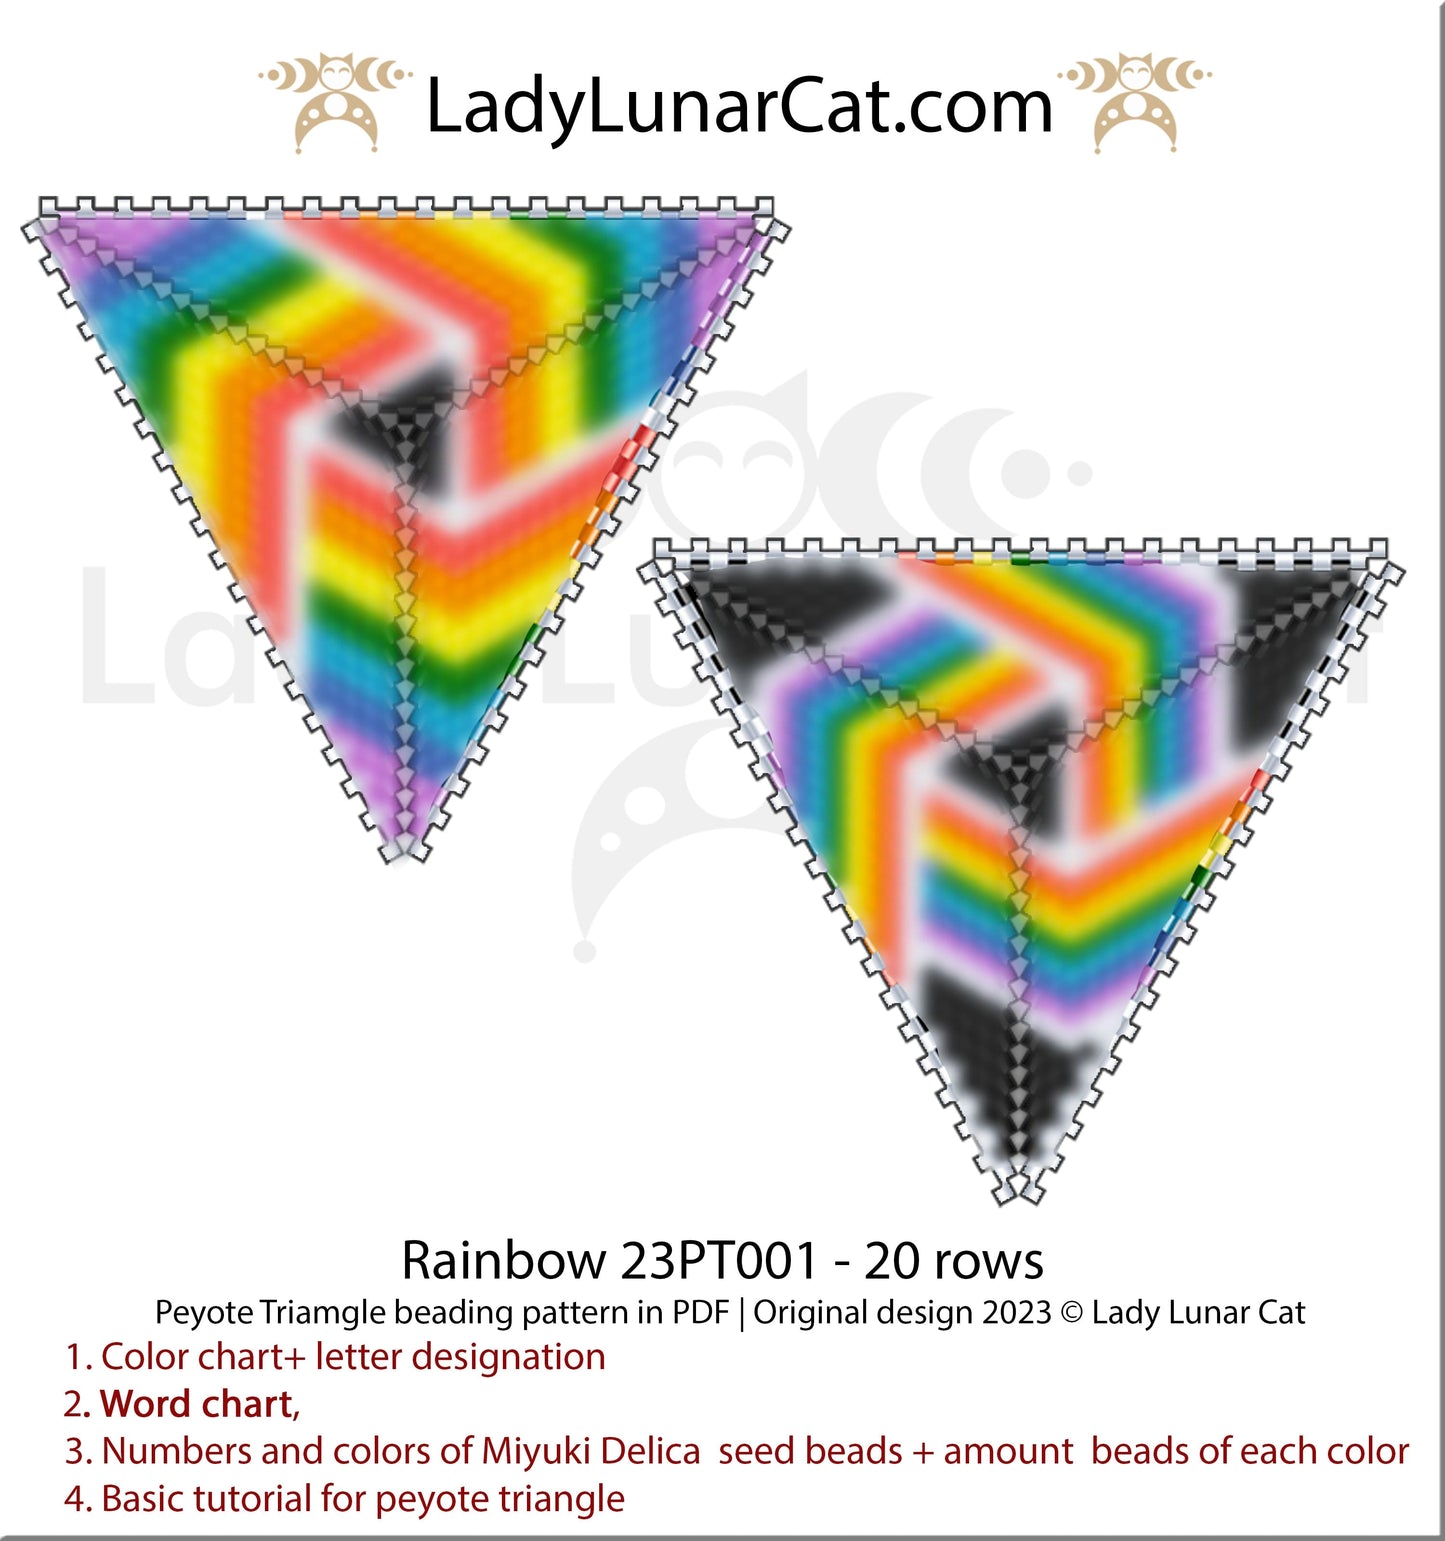 Copy of Peyote triangle pattern for beading Spring Roses 17PT005 LadyLunarCat